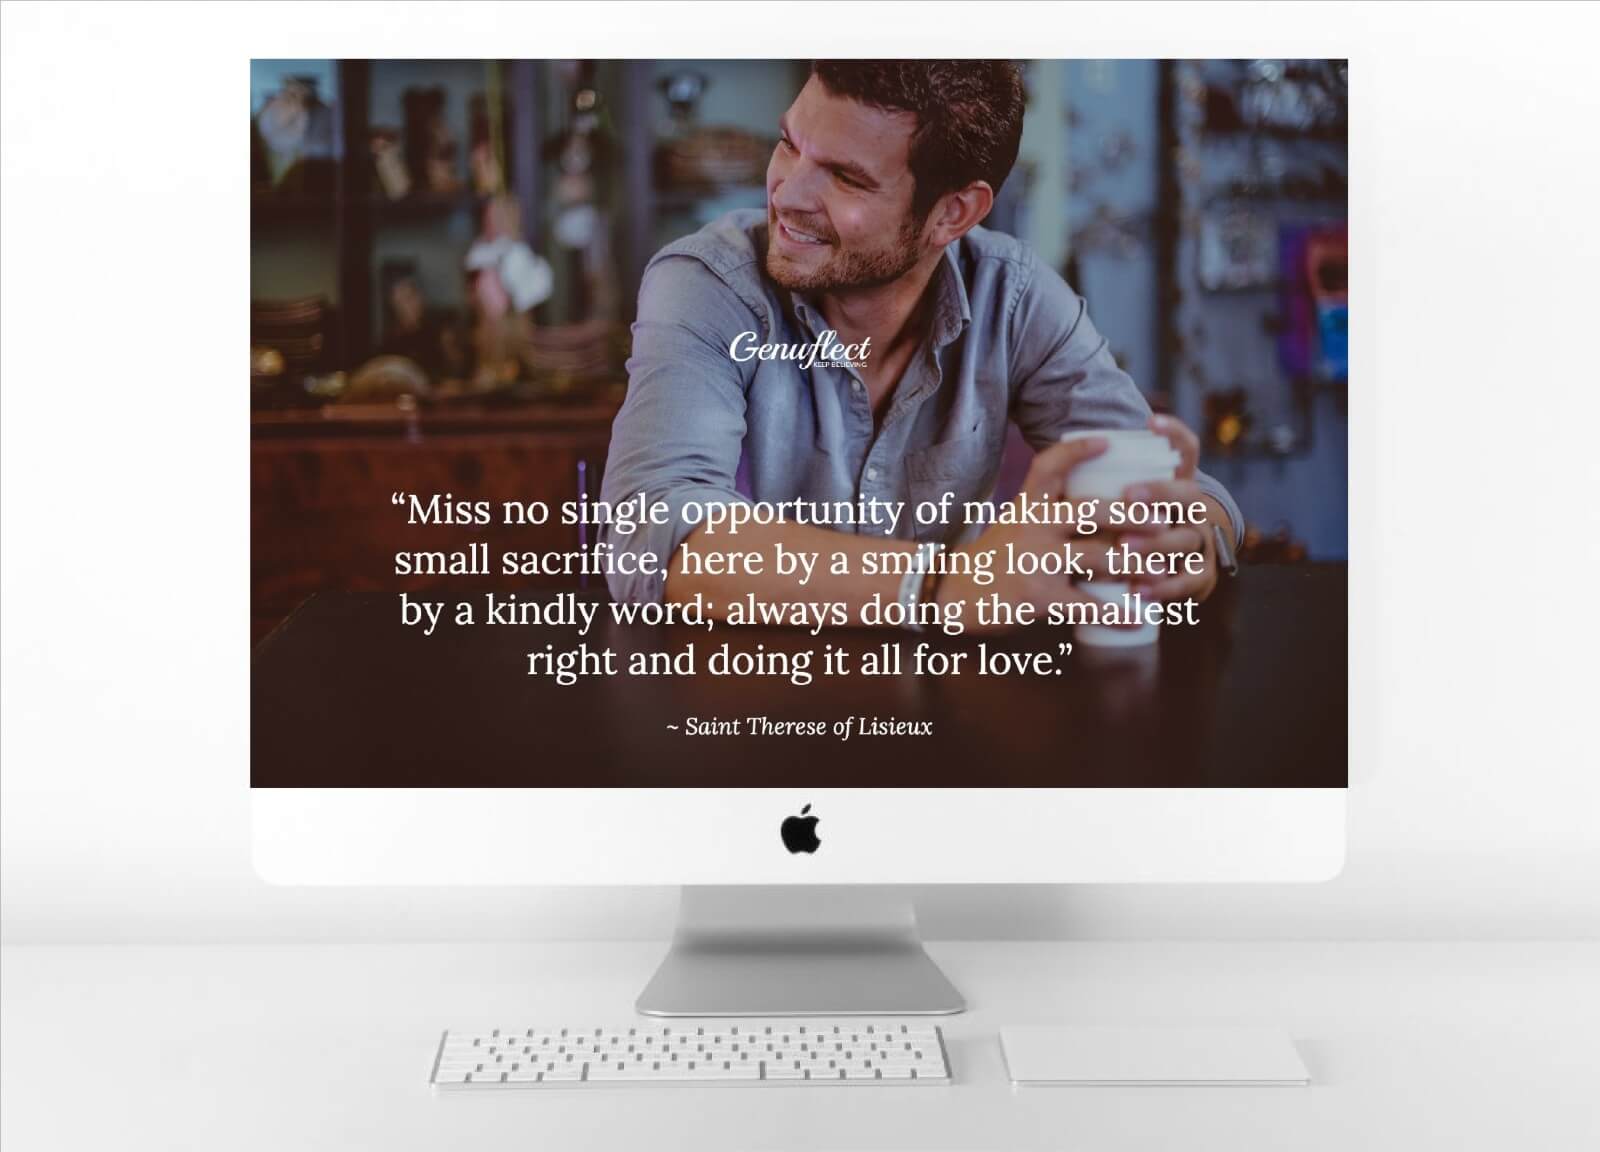 Genuflect image on background of computer of Man sitting at a table holding a coffee and smiling at someone